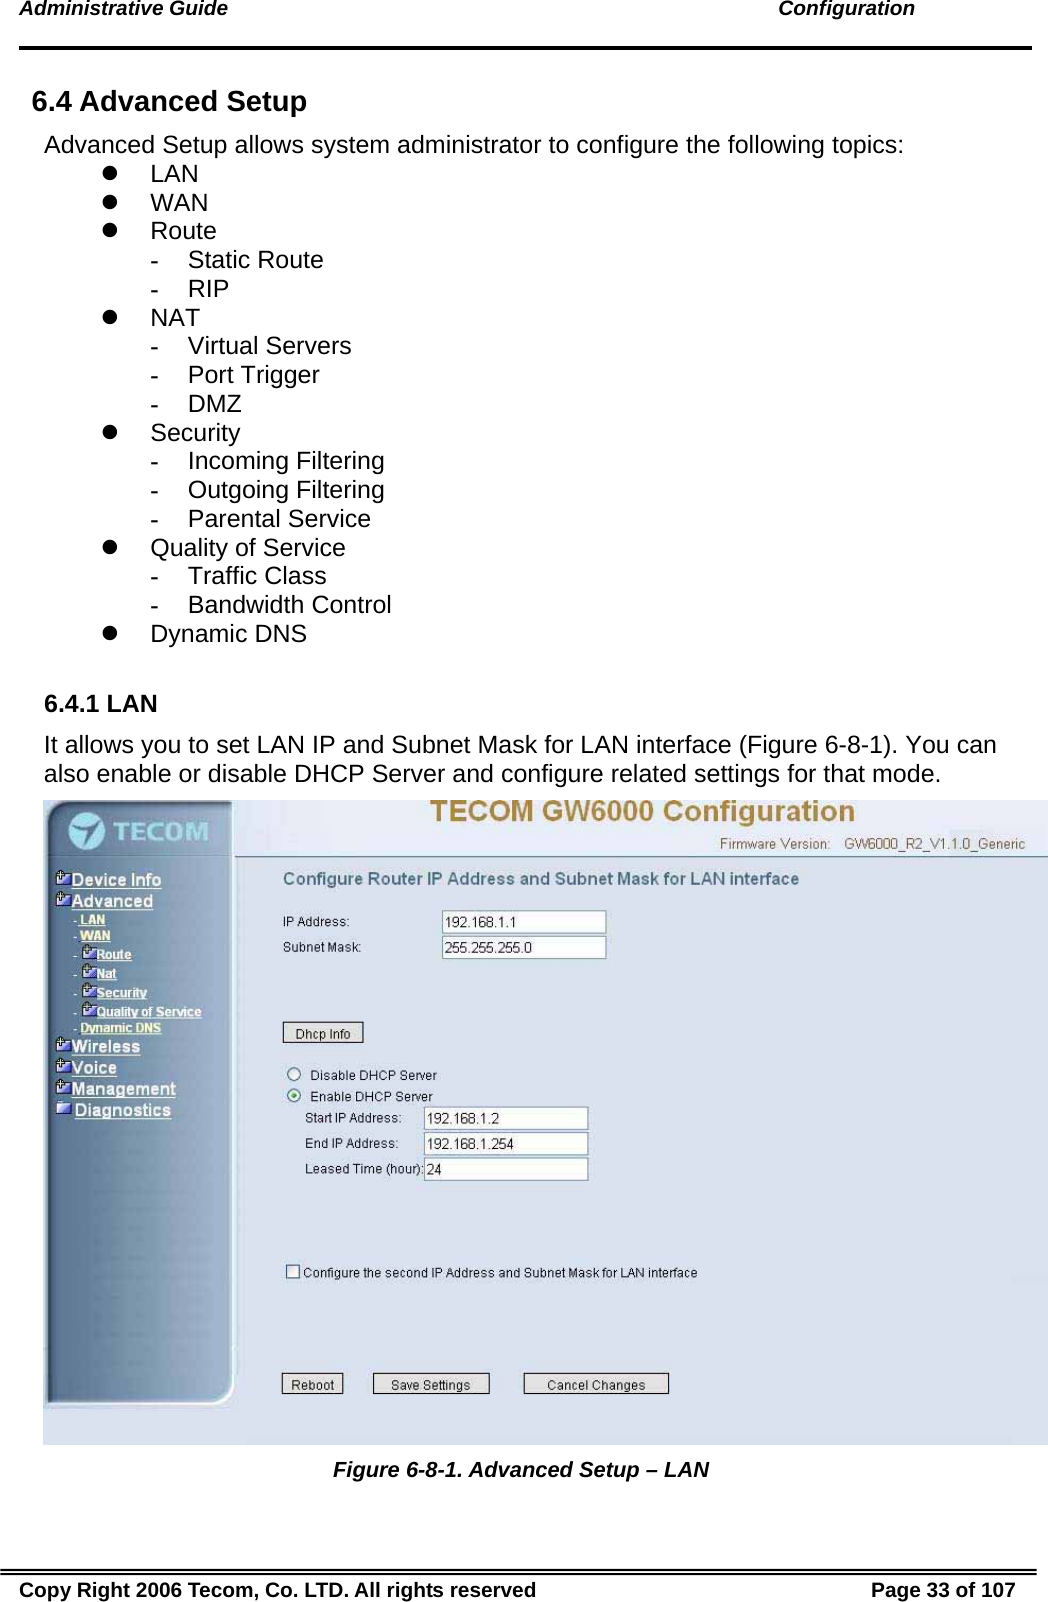 Administrative Guide                                                                                               Configuration 6.4 Advanced Setup Advanced Setup allows system administrator to configure the following topics: z LAN z WAN z Route - Static Route - RIP z NAT - Virtual Servers - Port Trigger - DMZ z Security - Incoming Filtering - Outgoing Filtering - Parental Service z  Quality of Service  - Traffic Class - Bandwidth Control z Dynamic DNS  6.4.1 LAN It allows you to set LAN IP and Subnet Mask for LAN interface (Figure 6-8-1). You can also enable or disable DHCP Server and configure related settings for that mode.   Figure 6-8-1. Advanced Setup – LAN Copy Right 2006 Tecom, Co. LTD. All rights reserved  Page 33 of 107 